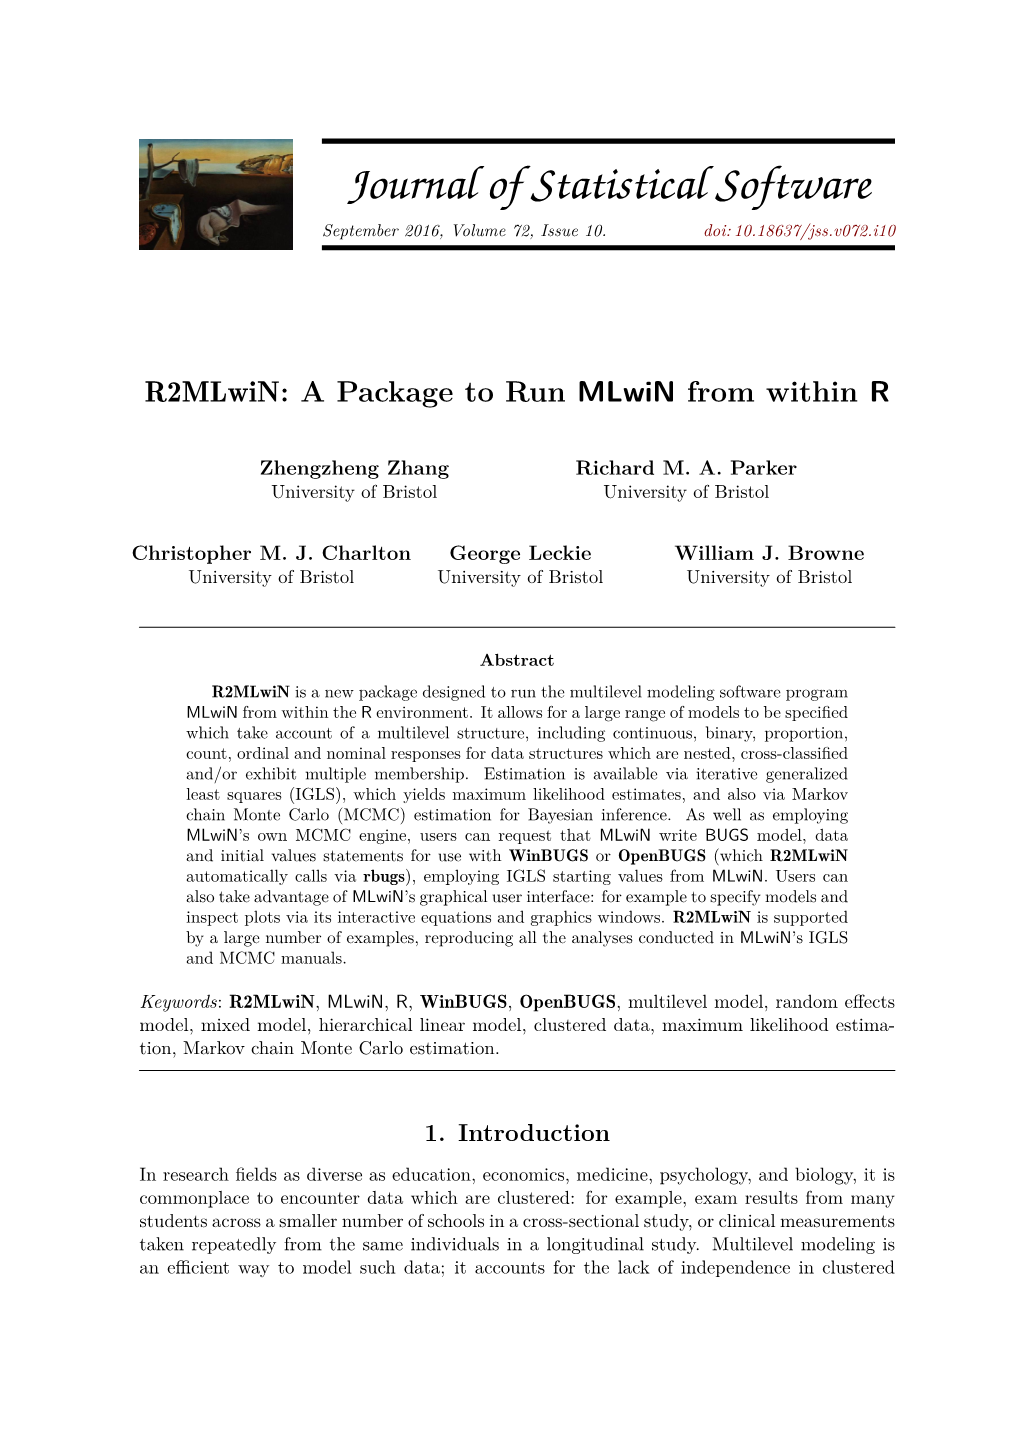 R2mlwin: a Package to Run Mlwin from Within R